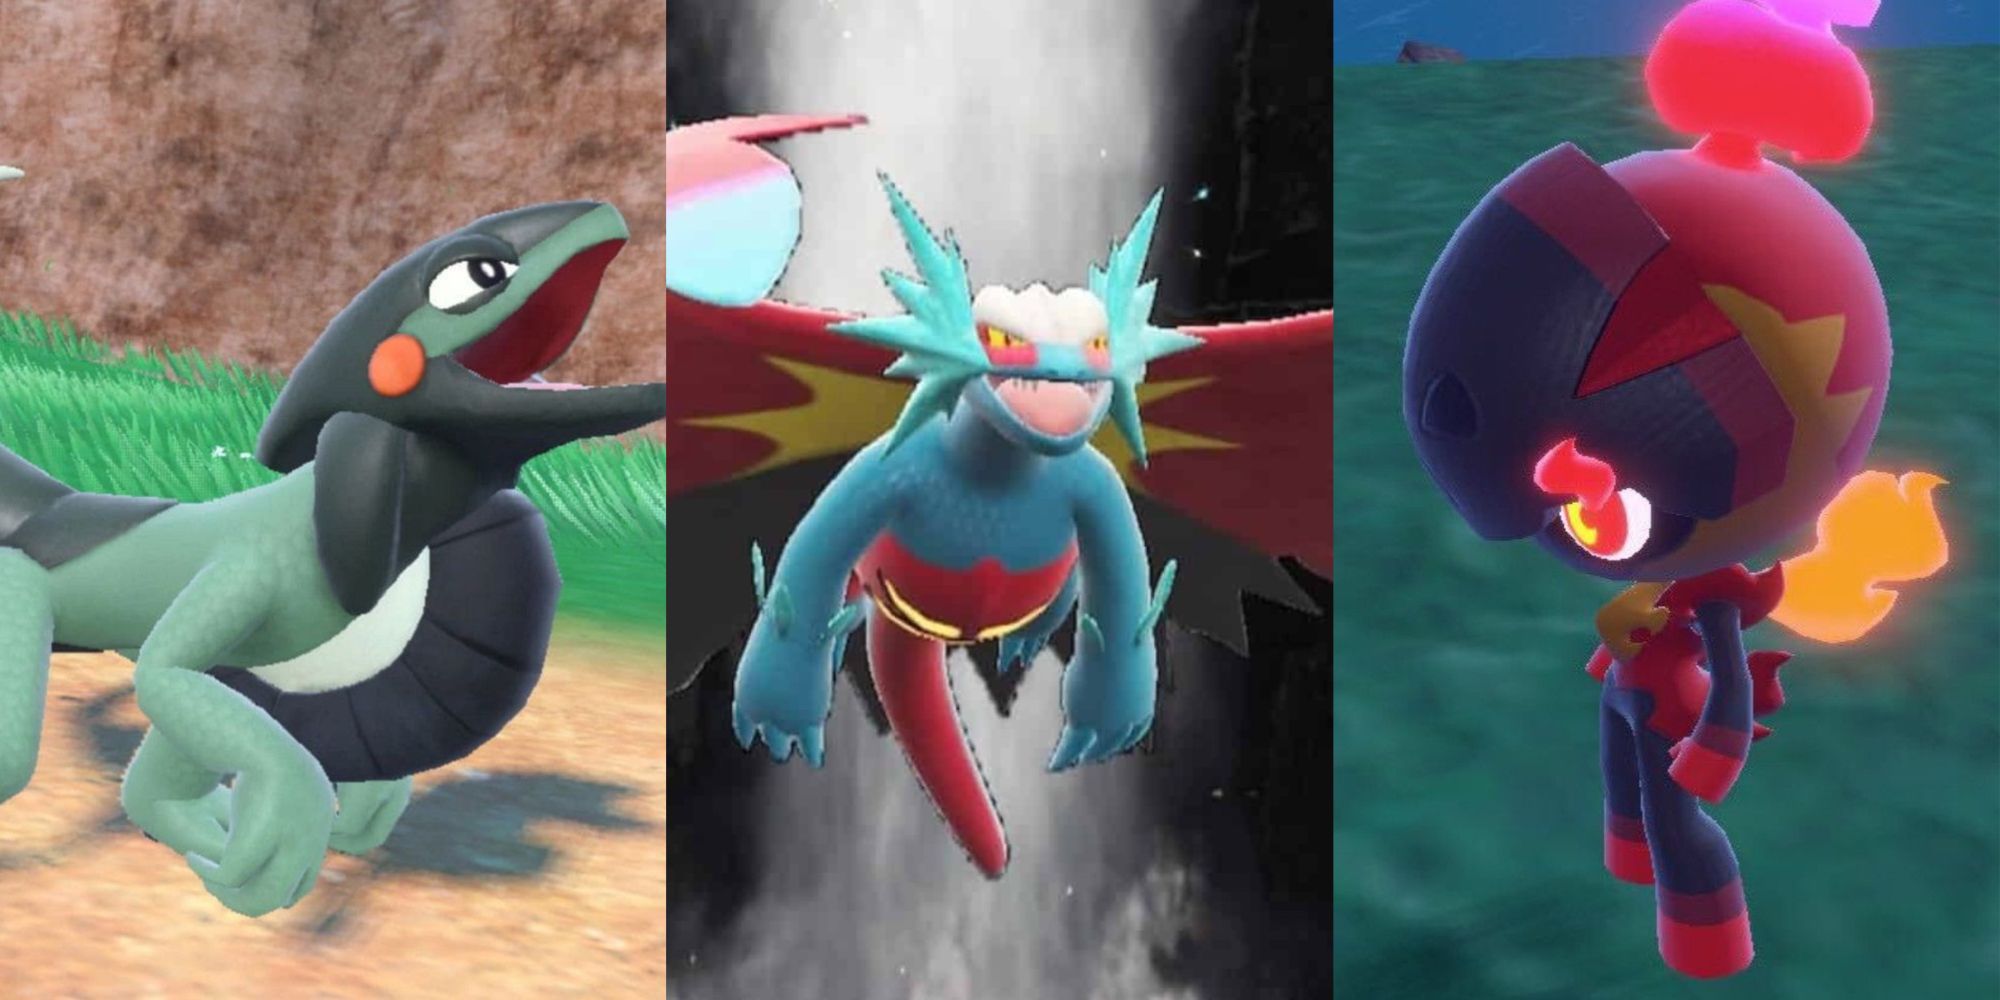 Pokemon Scarlet And Violet Review: Good If You Squint